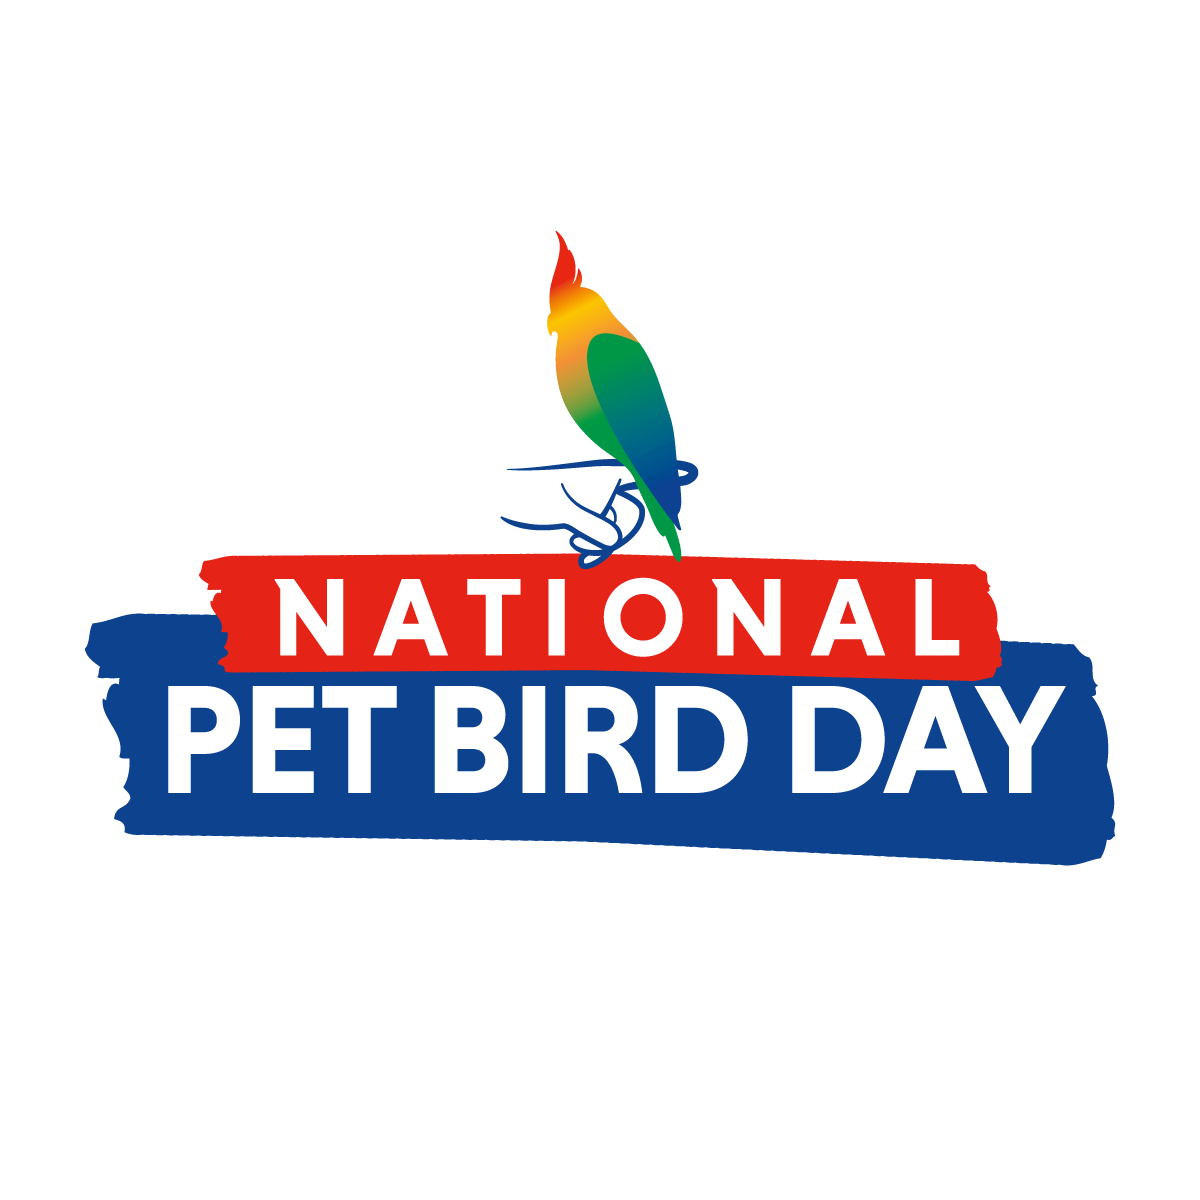 5th Annual National Pet Bird Day Celebrates the Joys and Benefits of Owning a Companion Bird